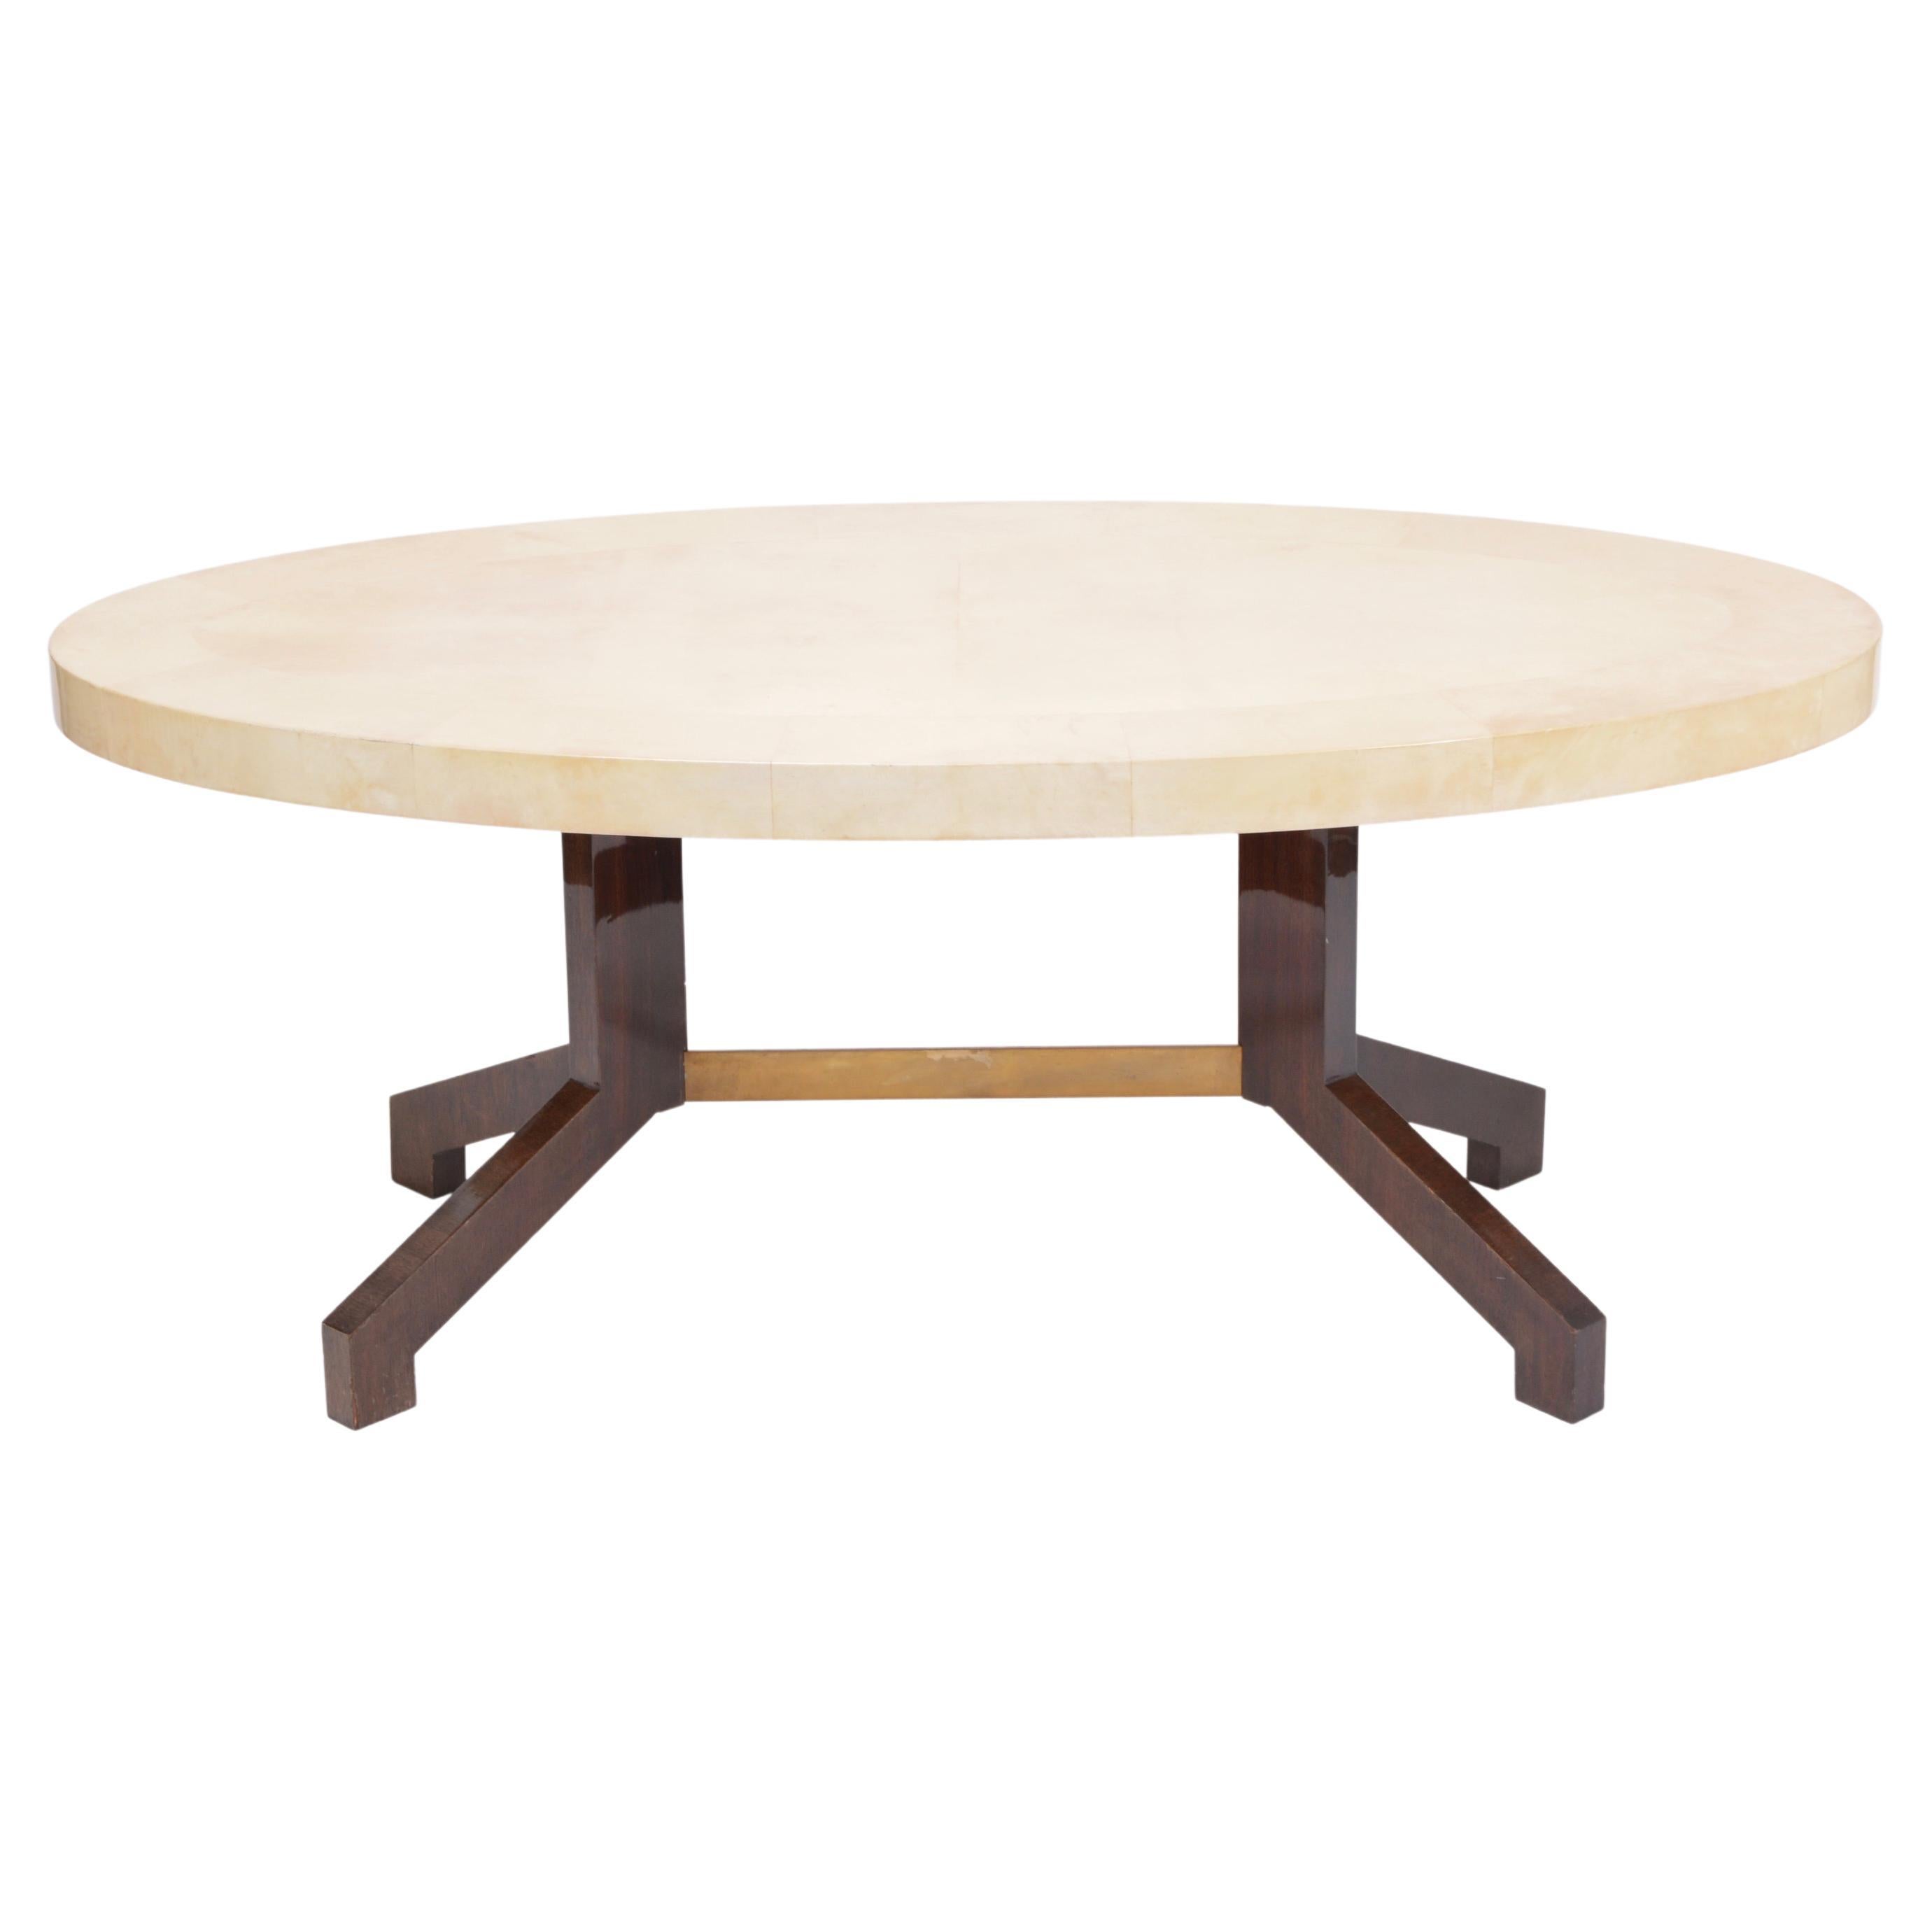 Beige Aldo Tura Oval Dining Table in Lacquered Goatskin